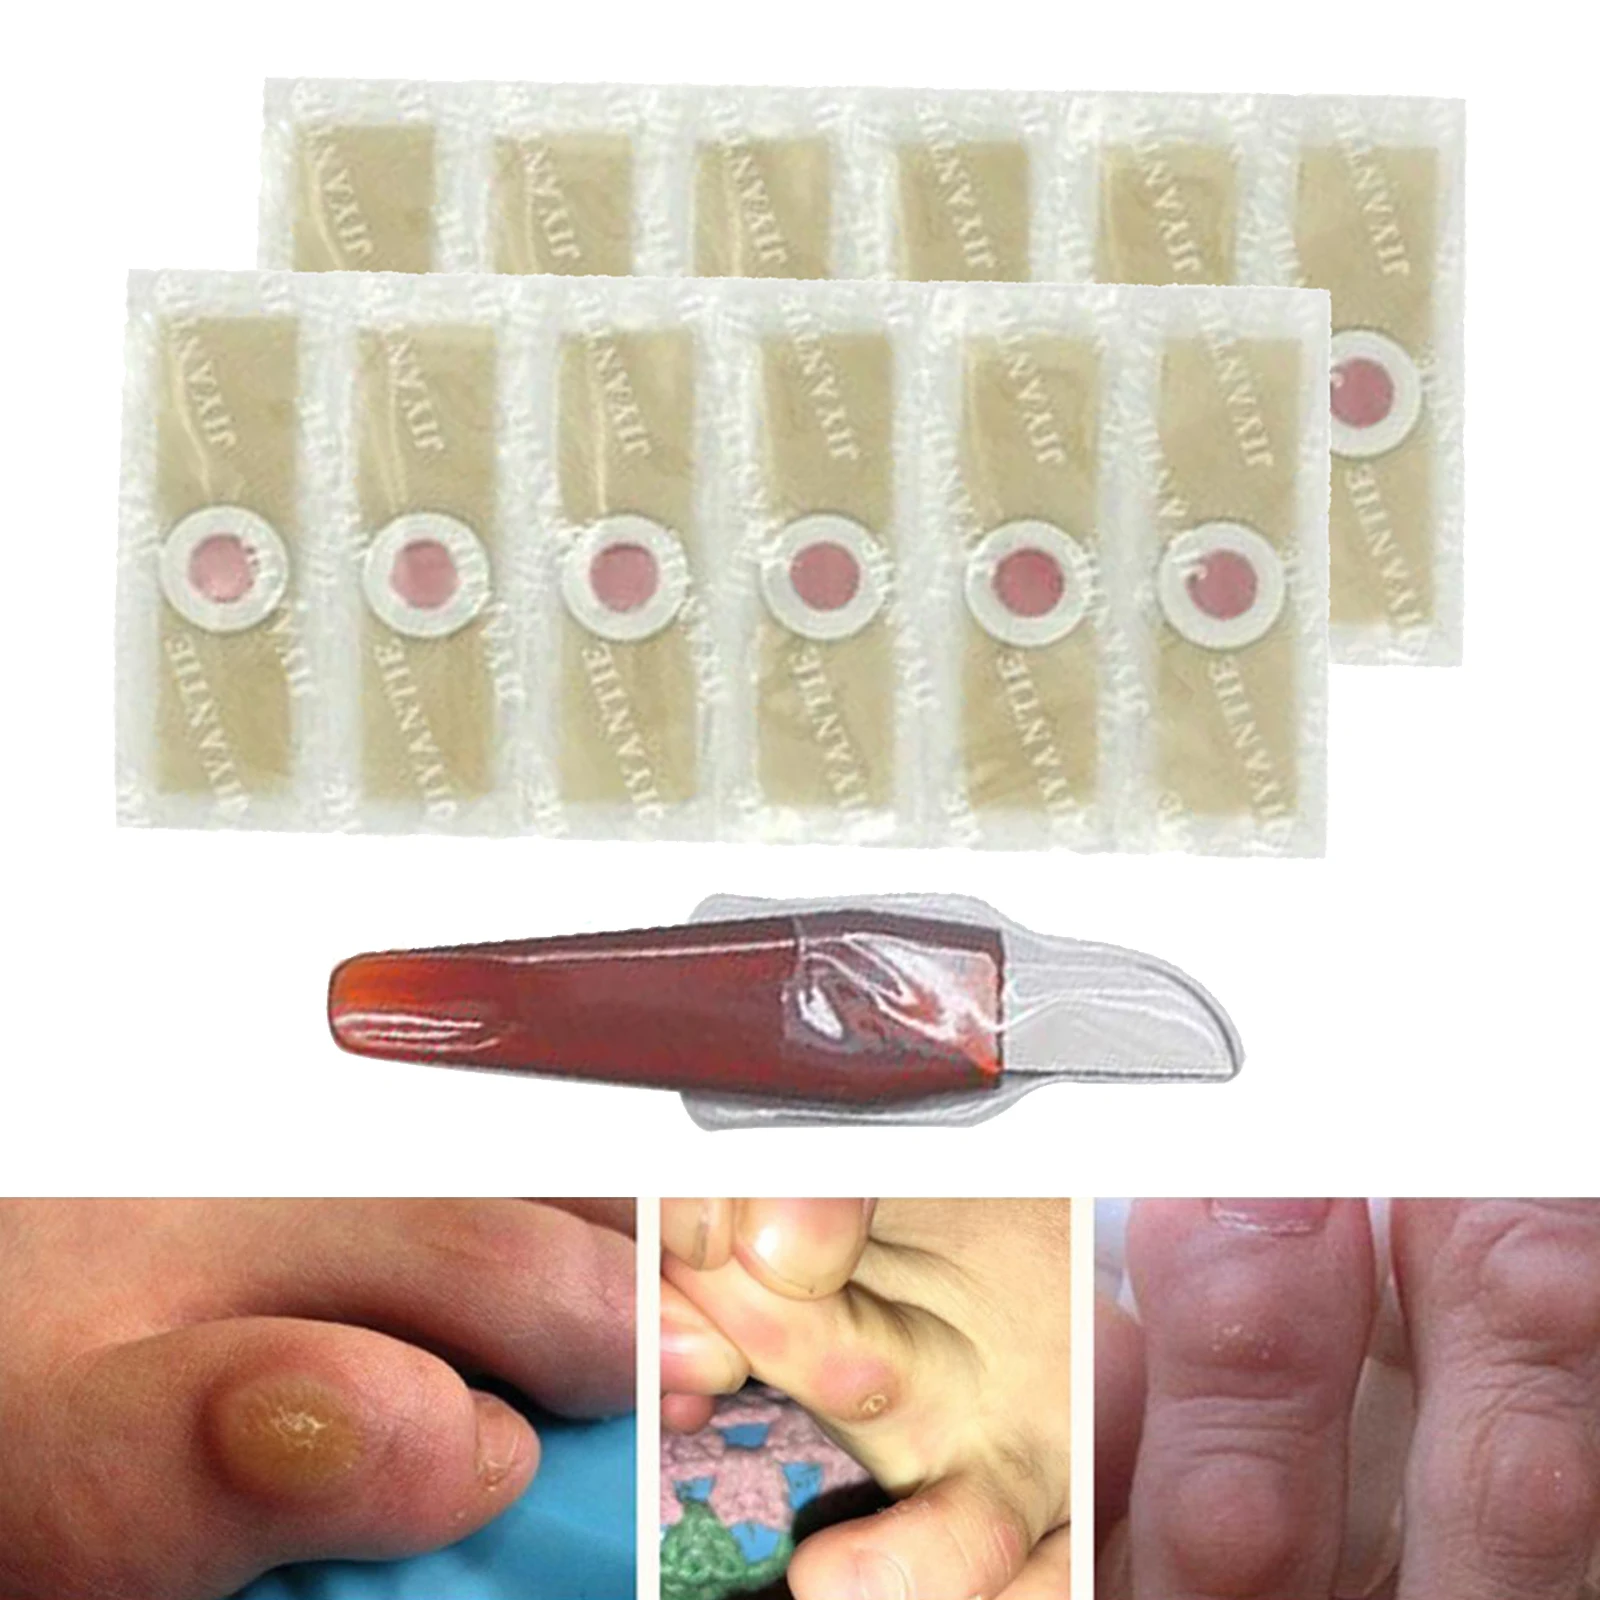 Pro Effective Foot Corn Removal Corn Remover Cushions Toe Protector with 